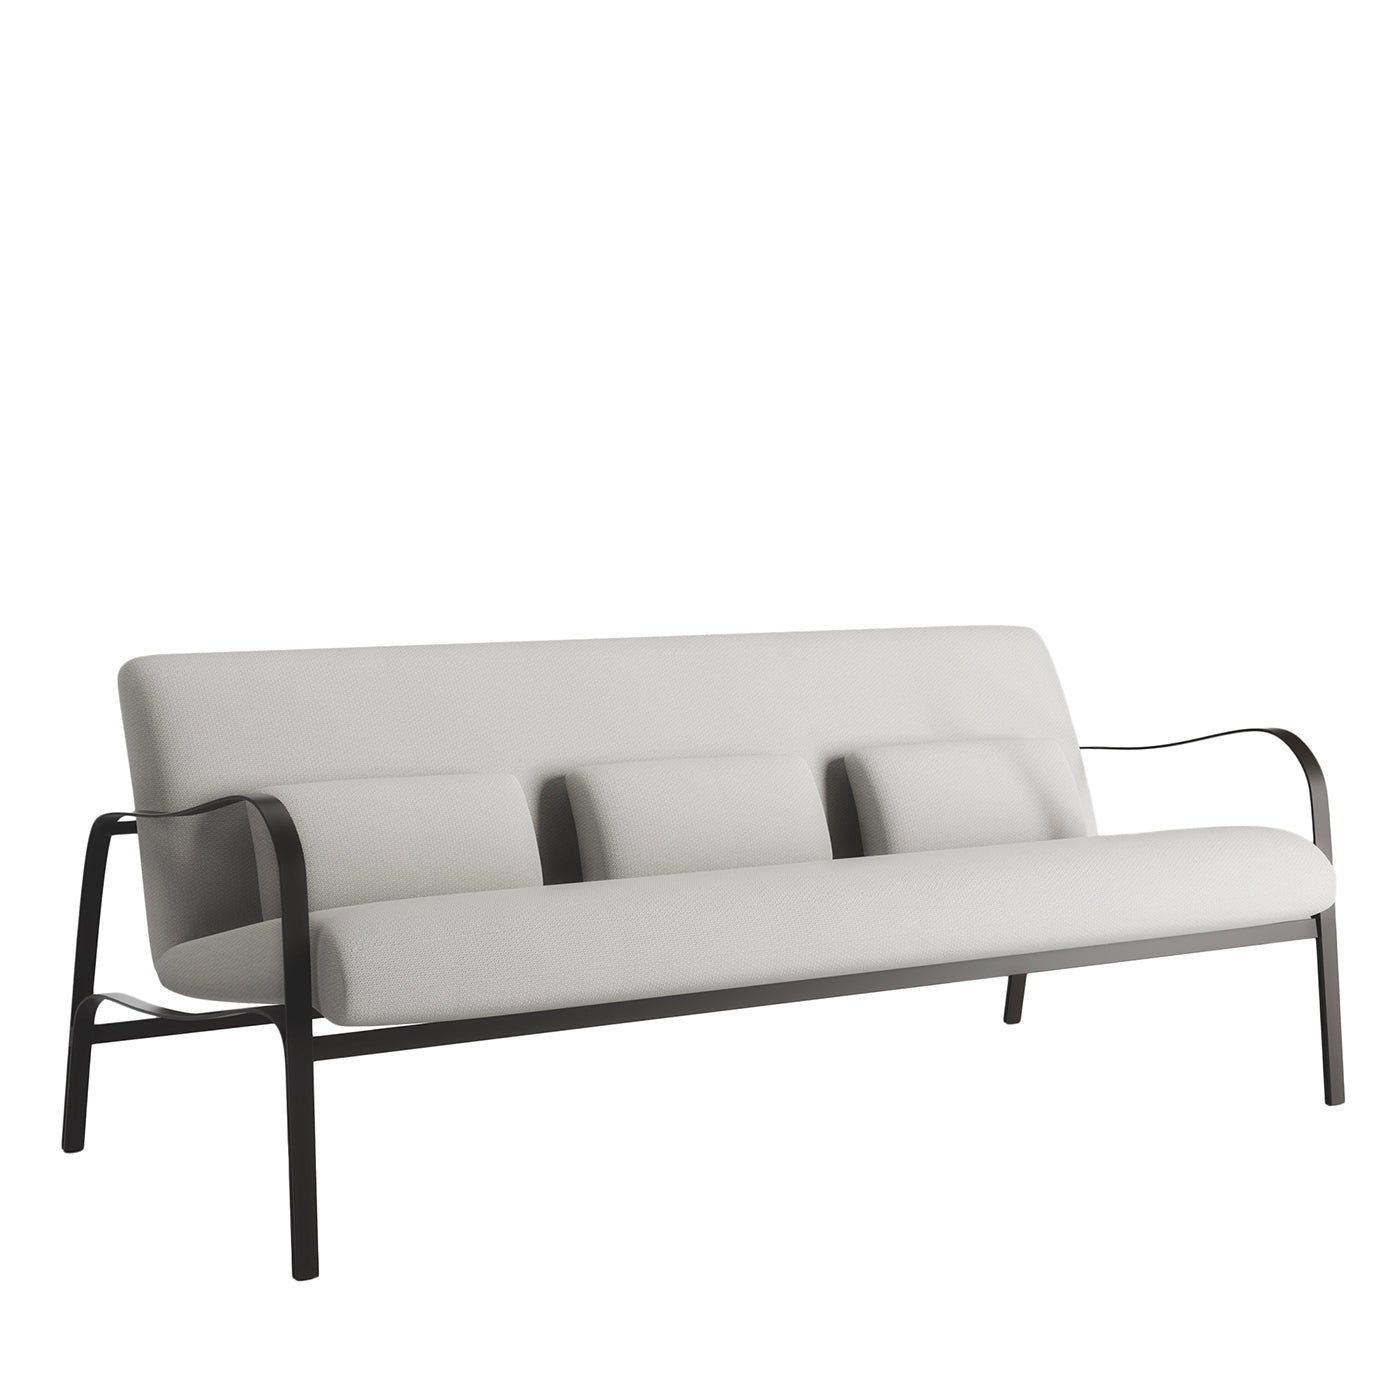 Amalfi White and Gray Sofa by Studio 63 in Stainless Steel - Main view